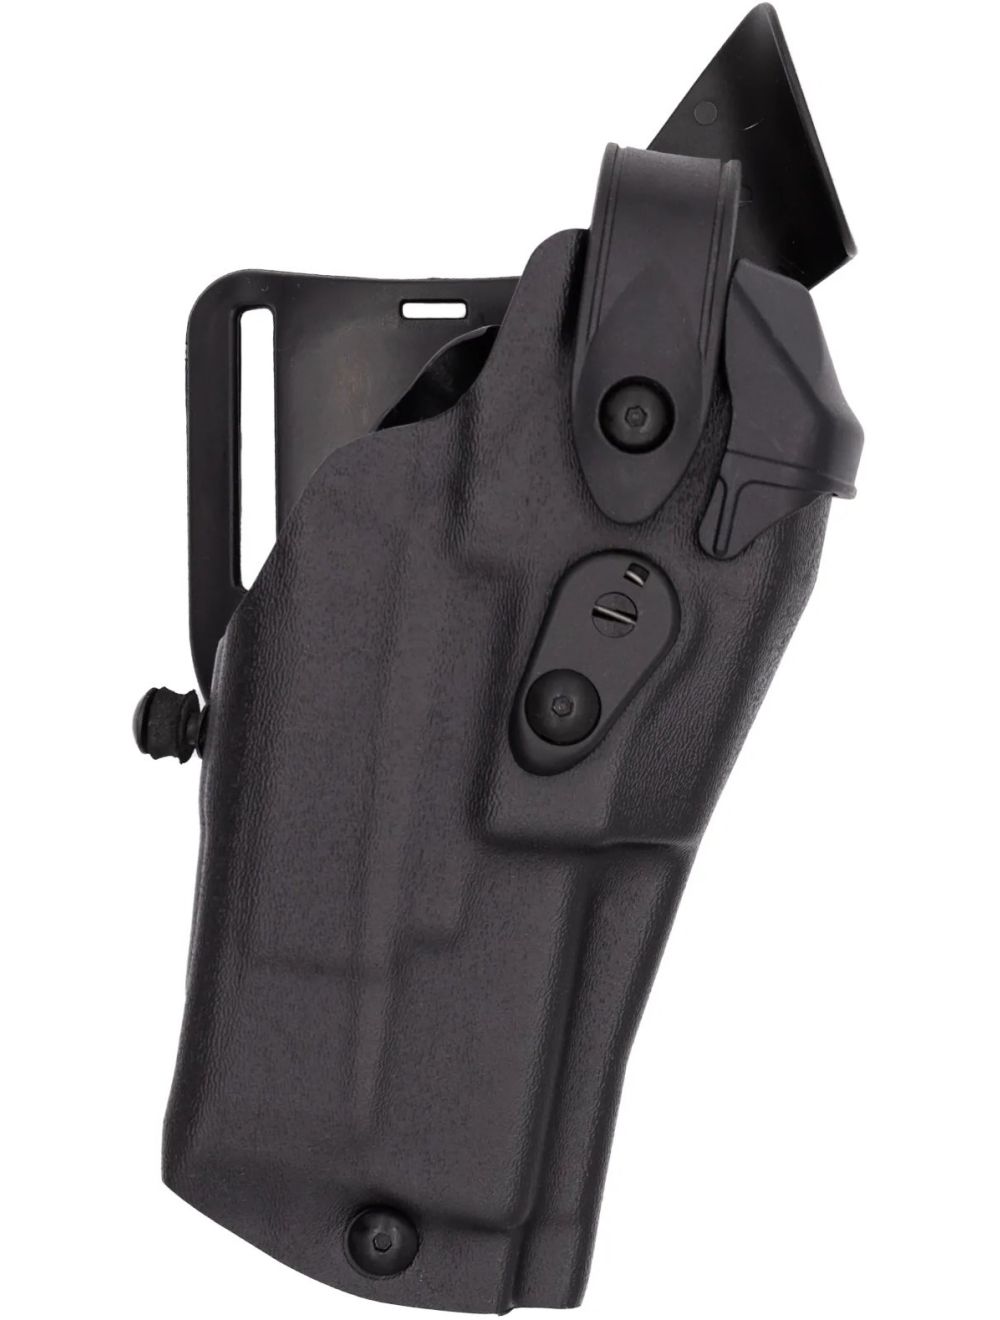 Model 6360RDS ALS/SLS Mid-Ride, Level III Retention Duty Holster for Glock 19 w/ Compact Light